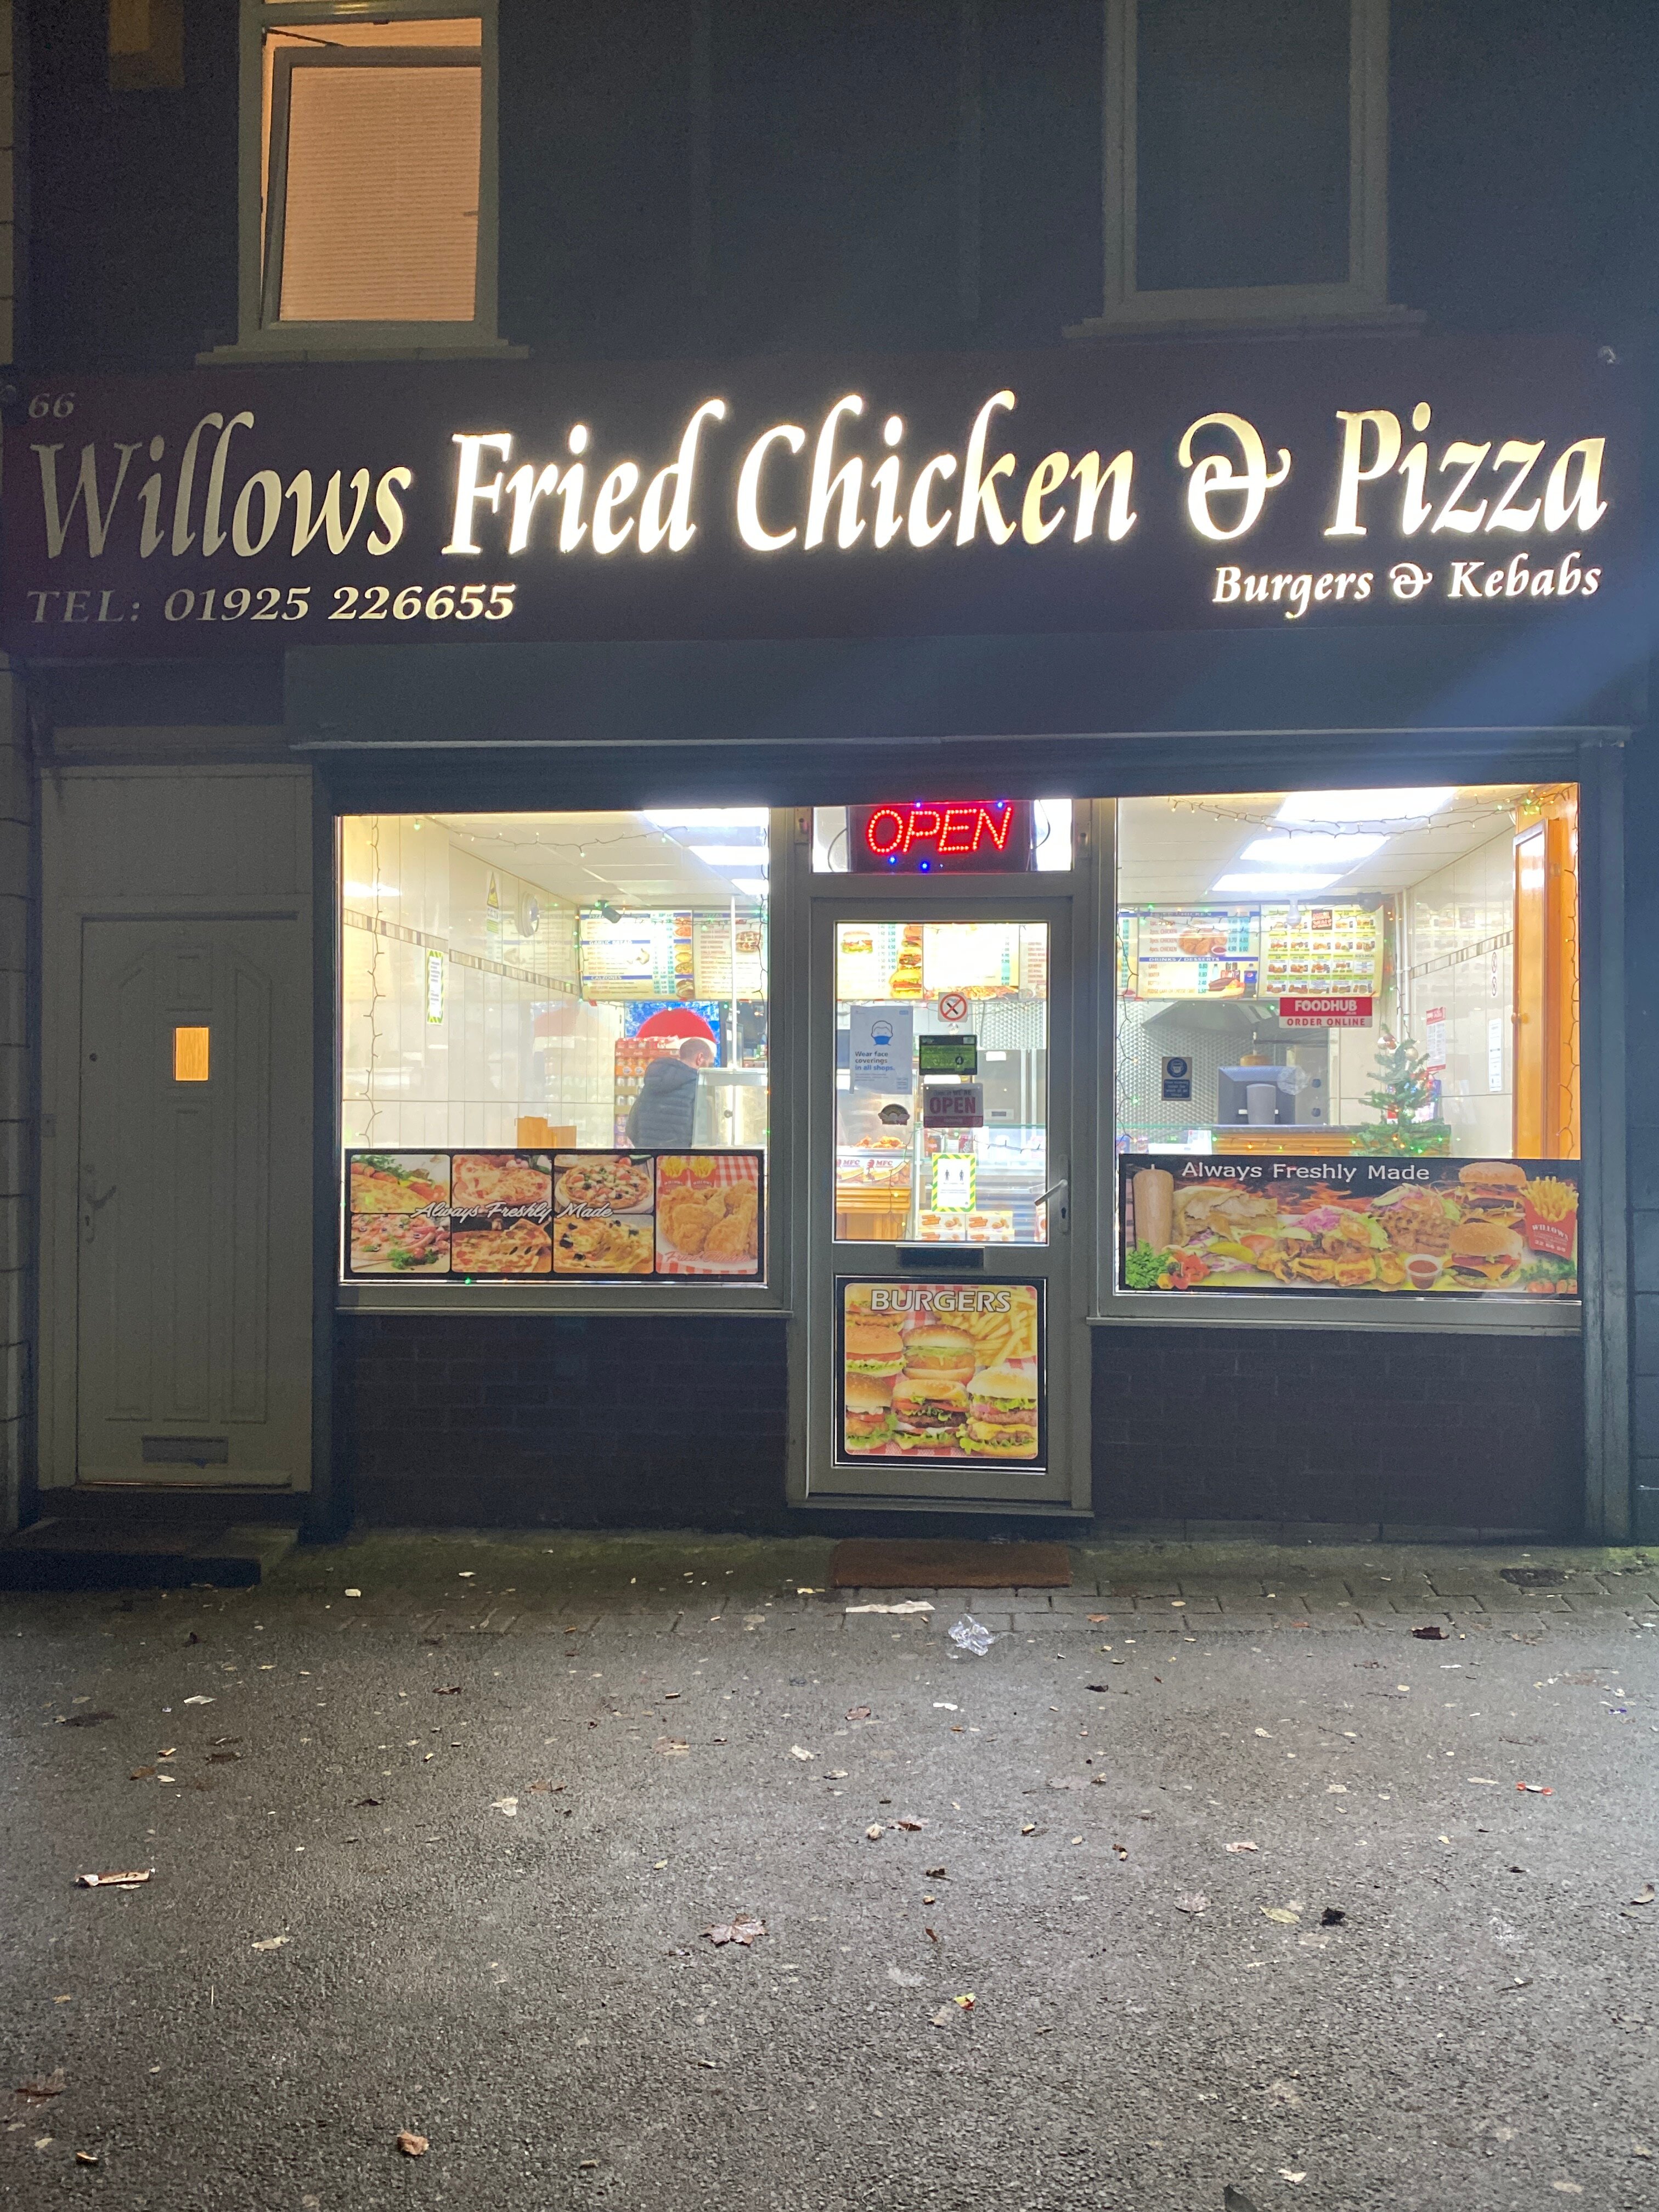 Willows Fried Chicken & Pizza